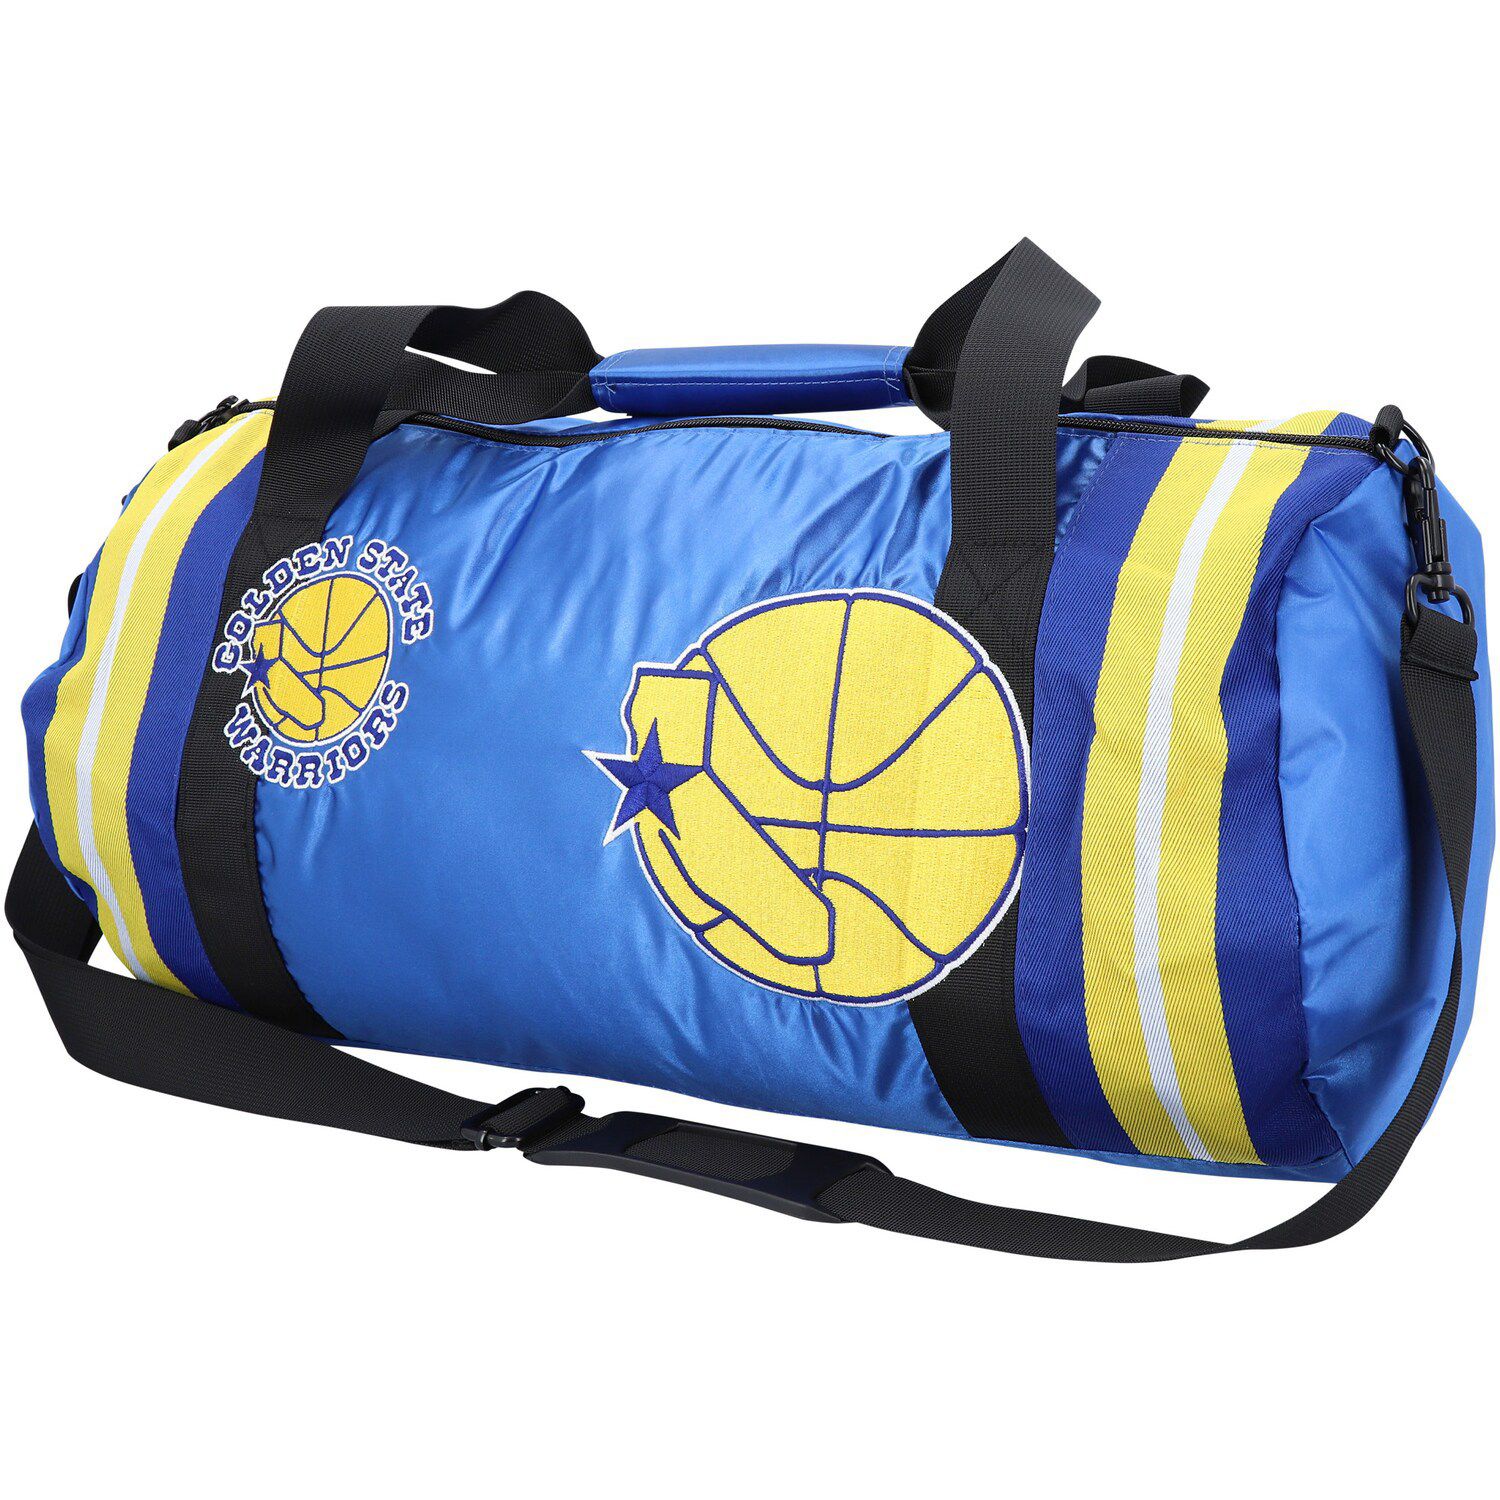 Image for Unbranded Mitchell & Ness Golden State Warriors Satin Duffel Bag at Kohl's.